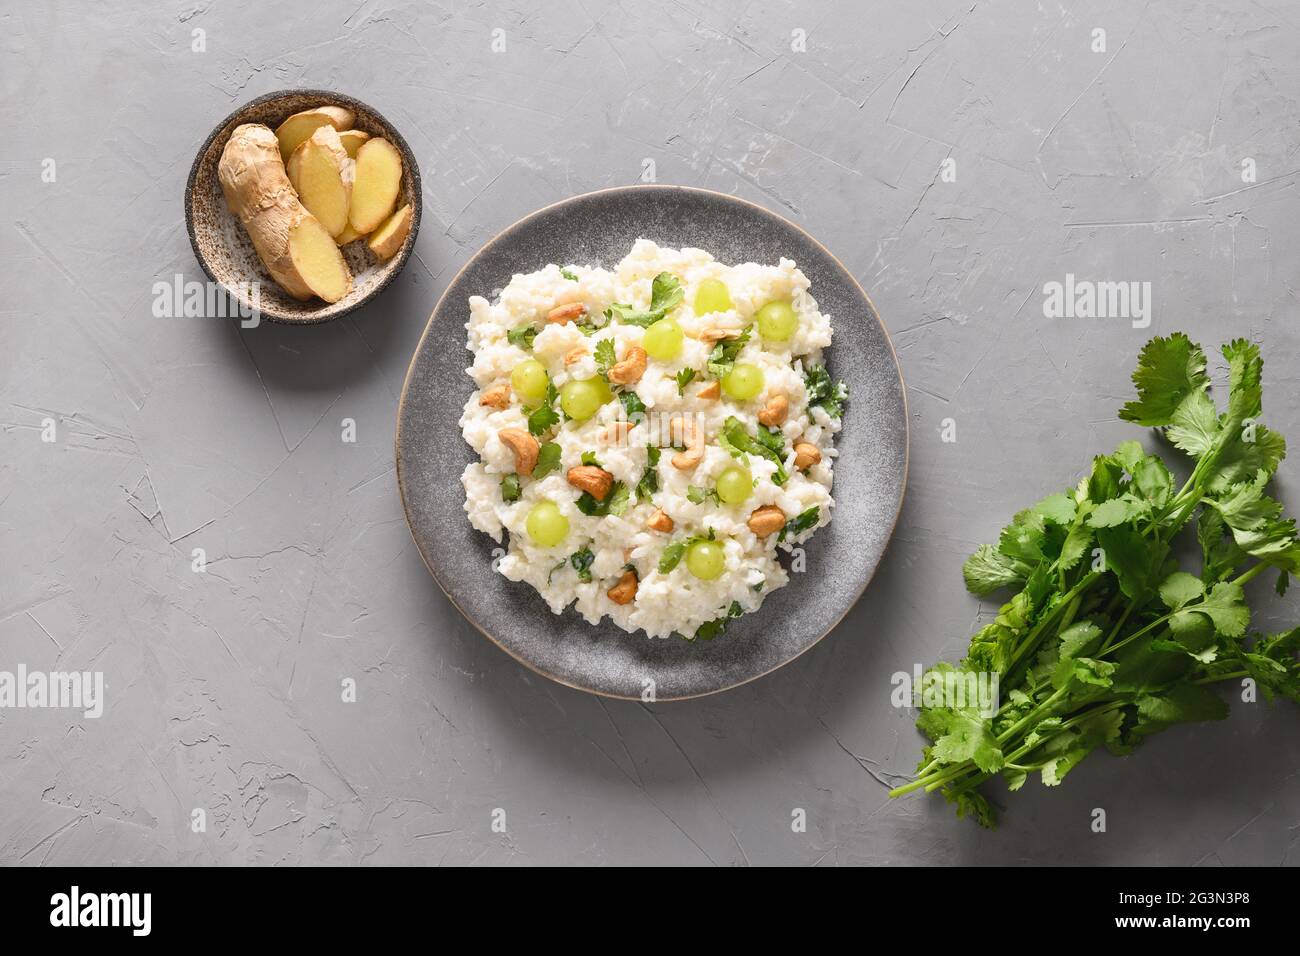 Curd Rice with cashews, grapes, cilantro on a grey background. Indian South cuisine. Top view. Stock Photo